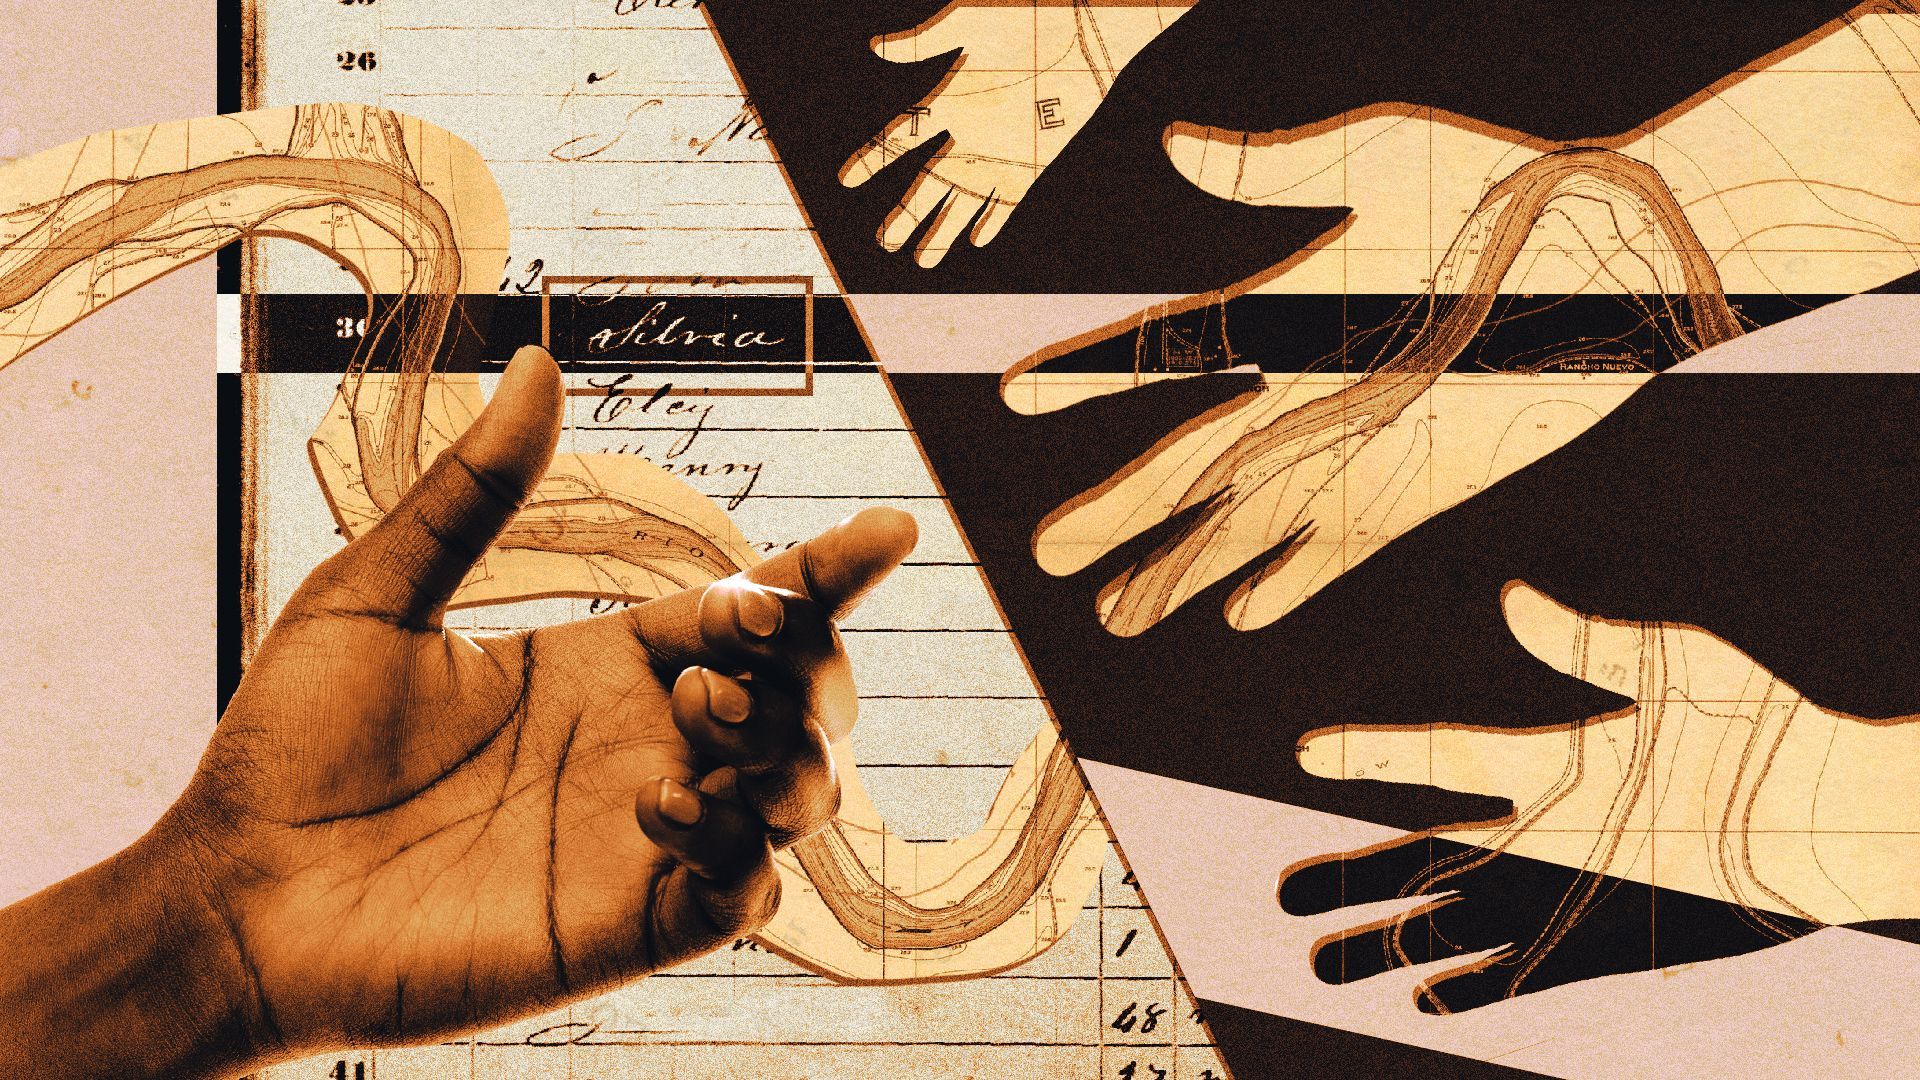 Photo illustration of a Black person's hand reaching towards silhouettes of hands, across a map of the Rio Grande and a ledger with the name 